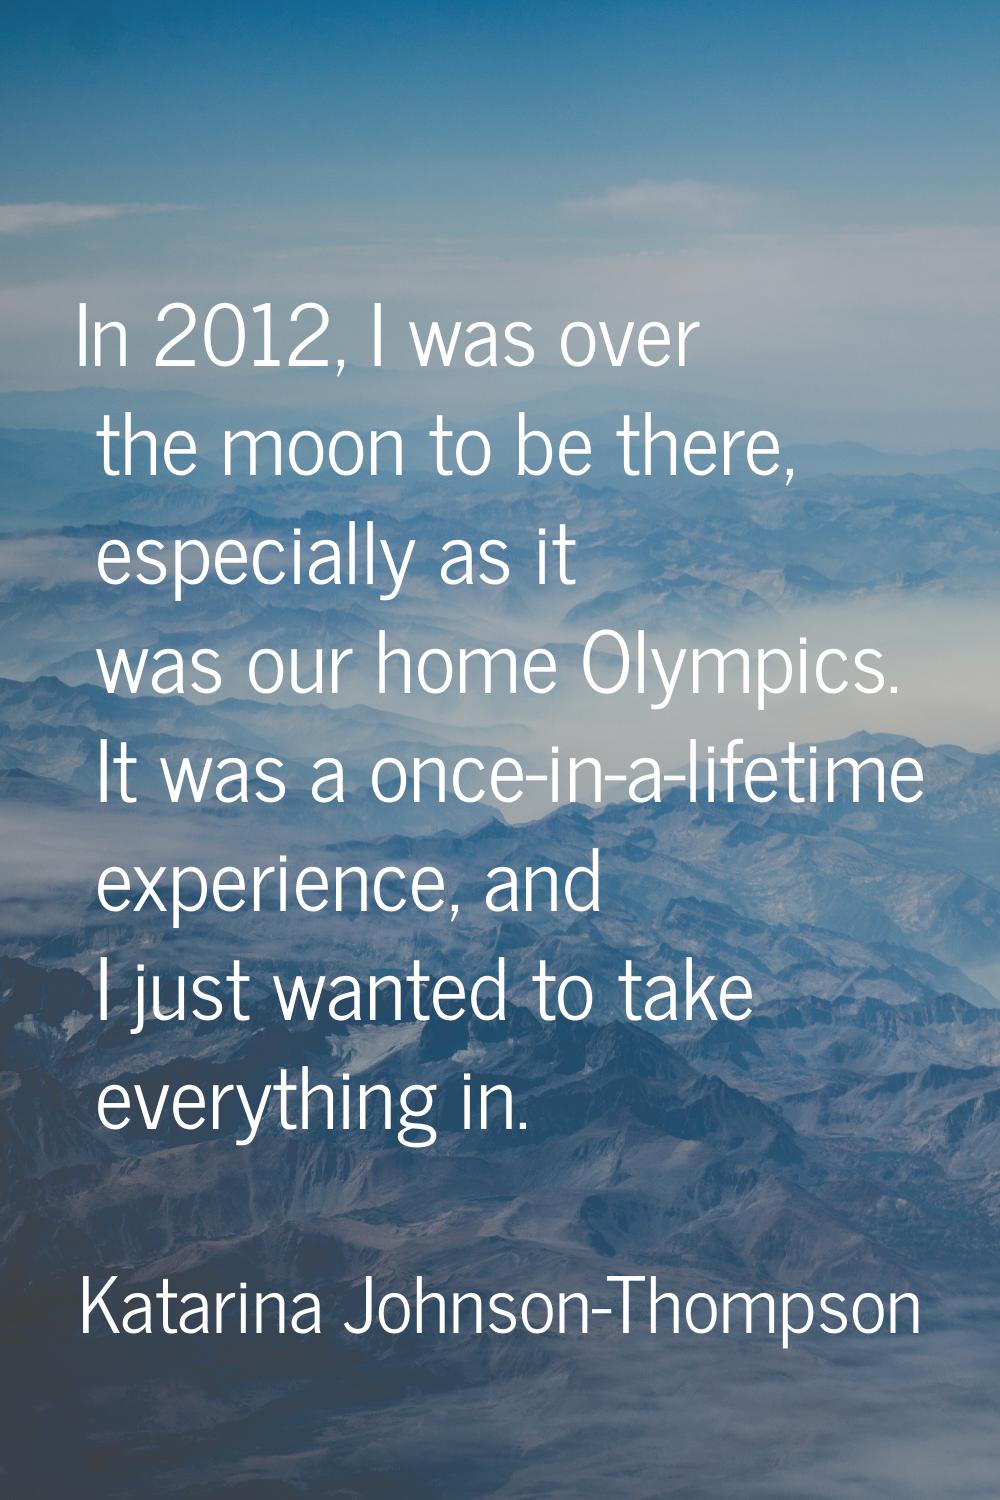 In 2012, I was over the moon to be there, especially as it was our home Olympics. It was a once-in-